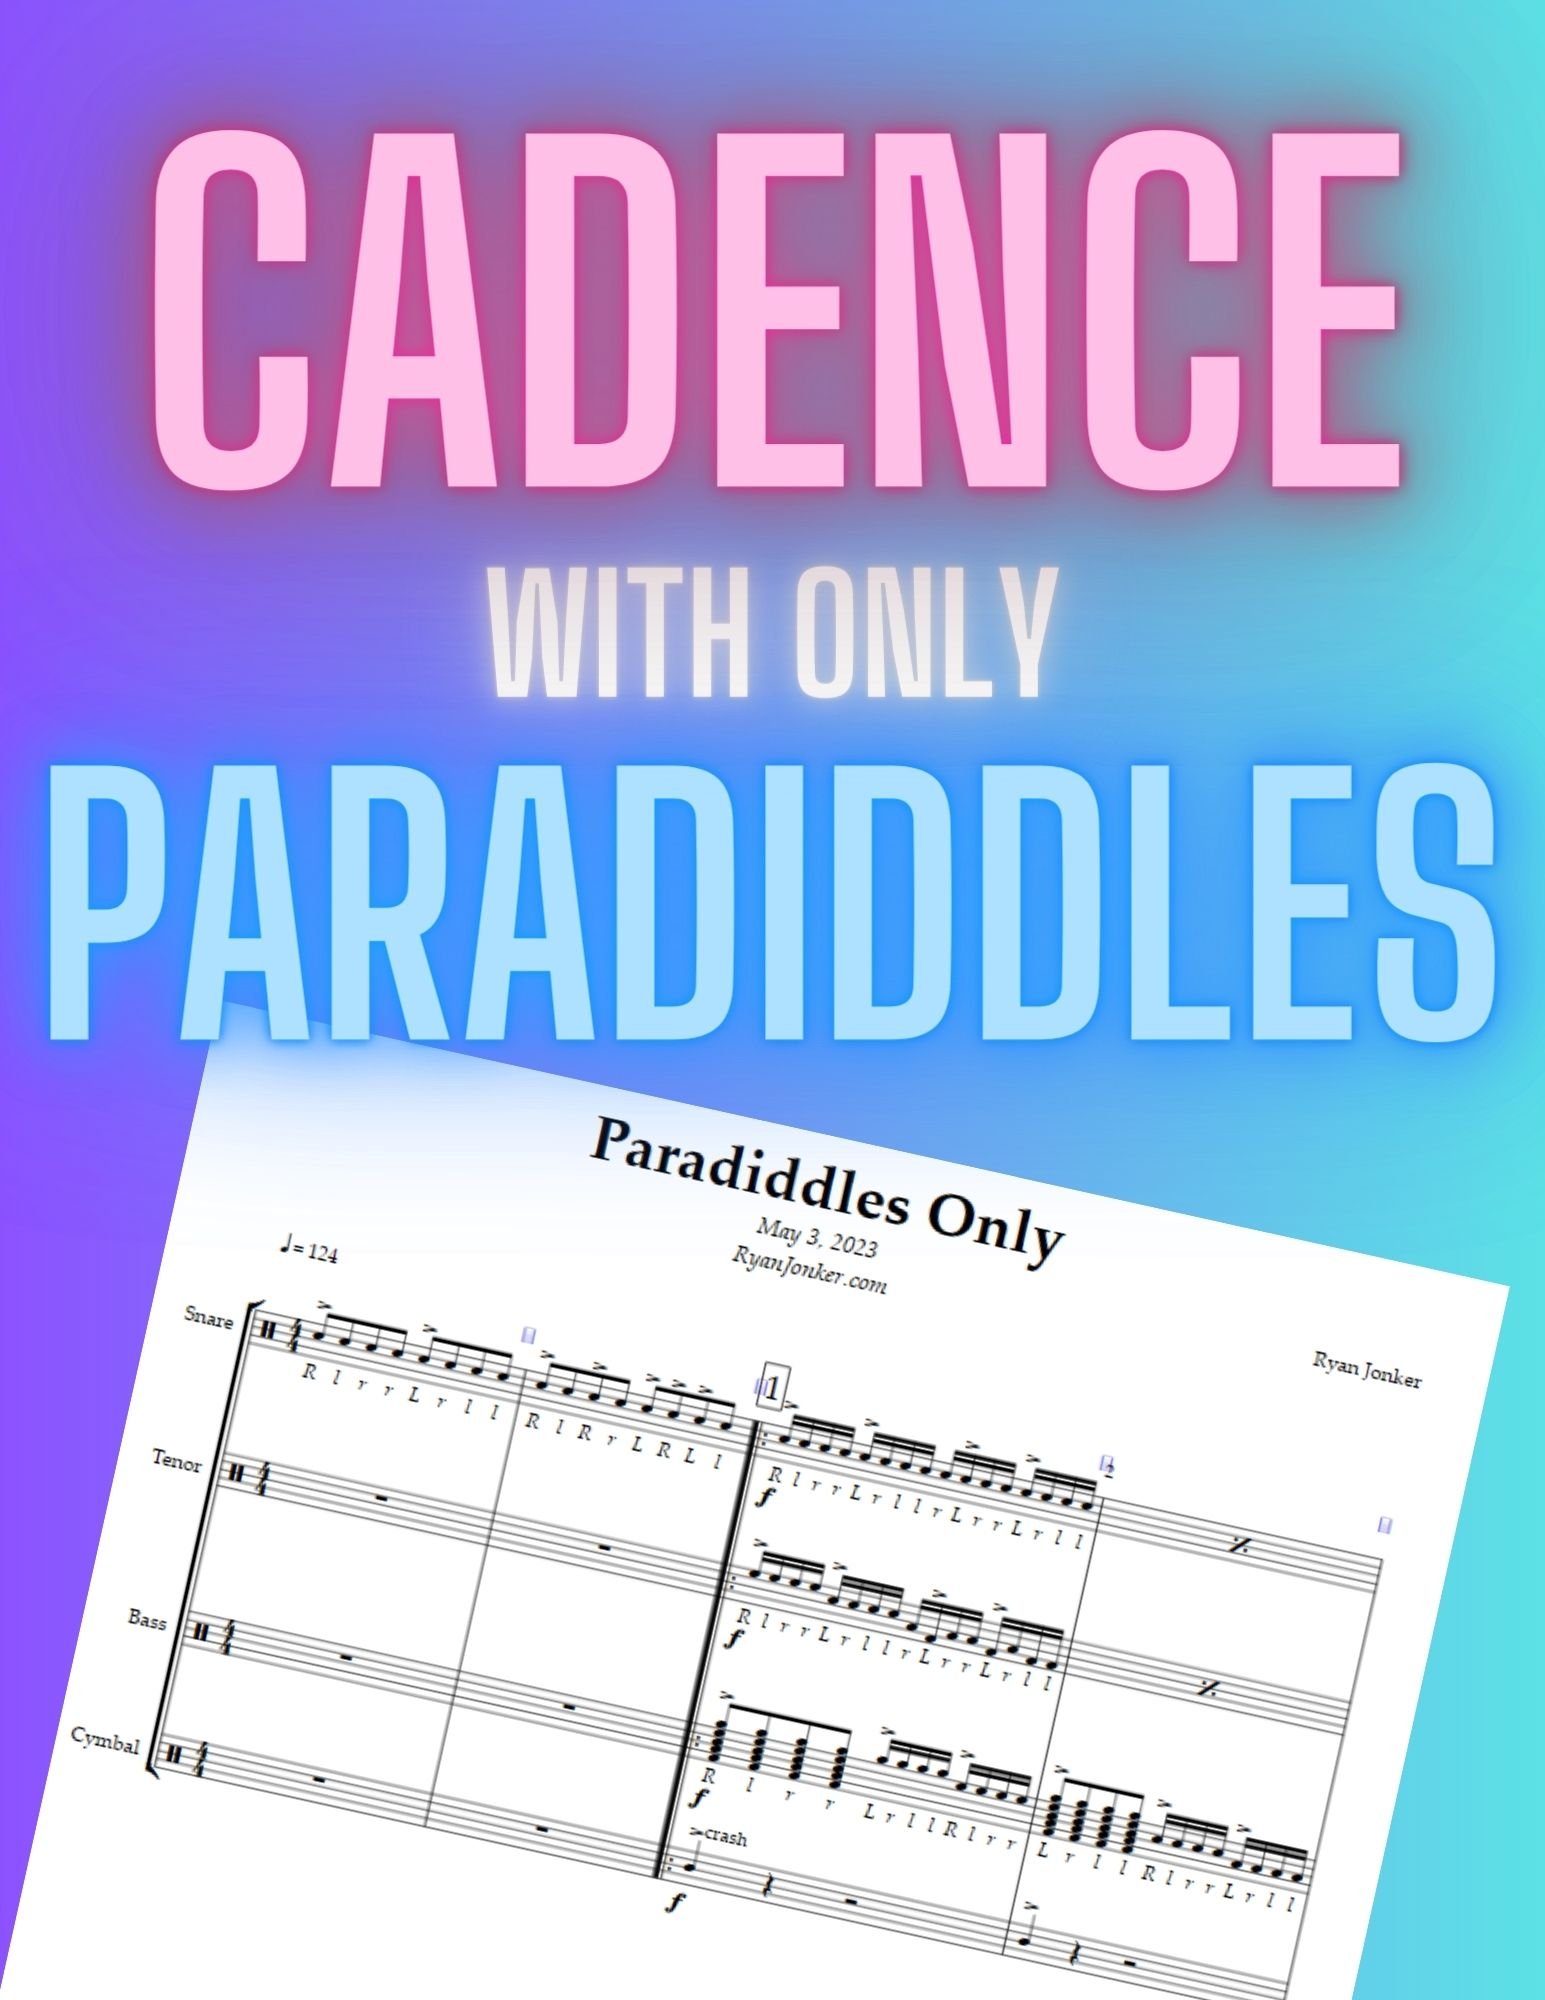 Paradiddles Only Portrait (2).jpg